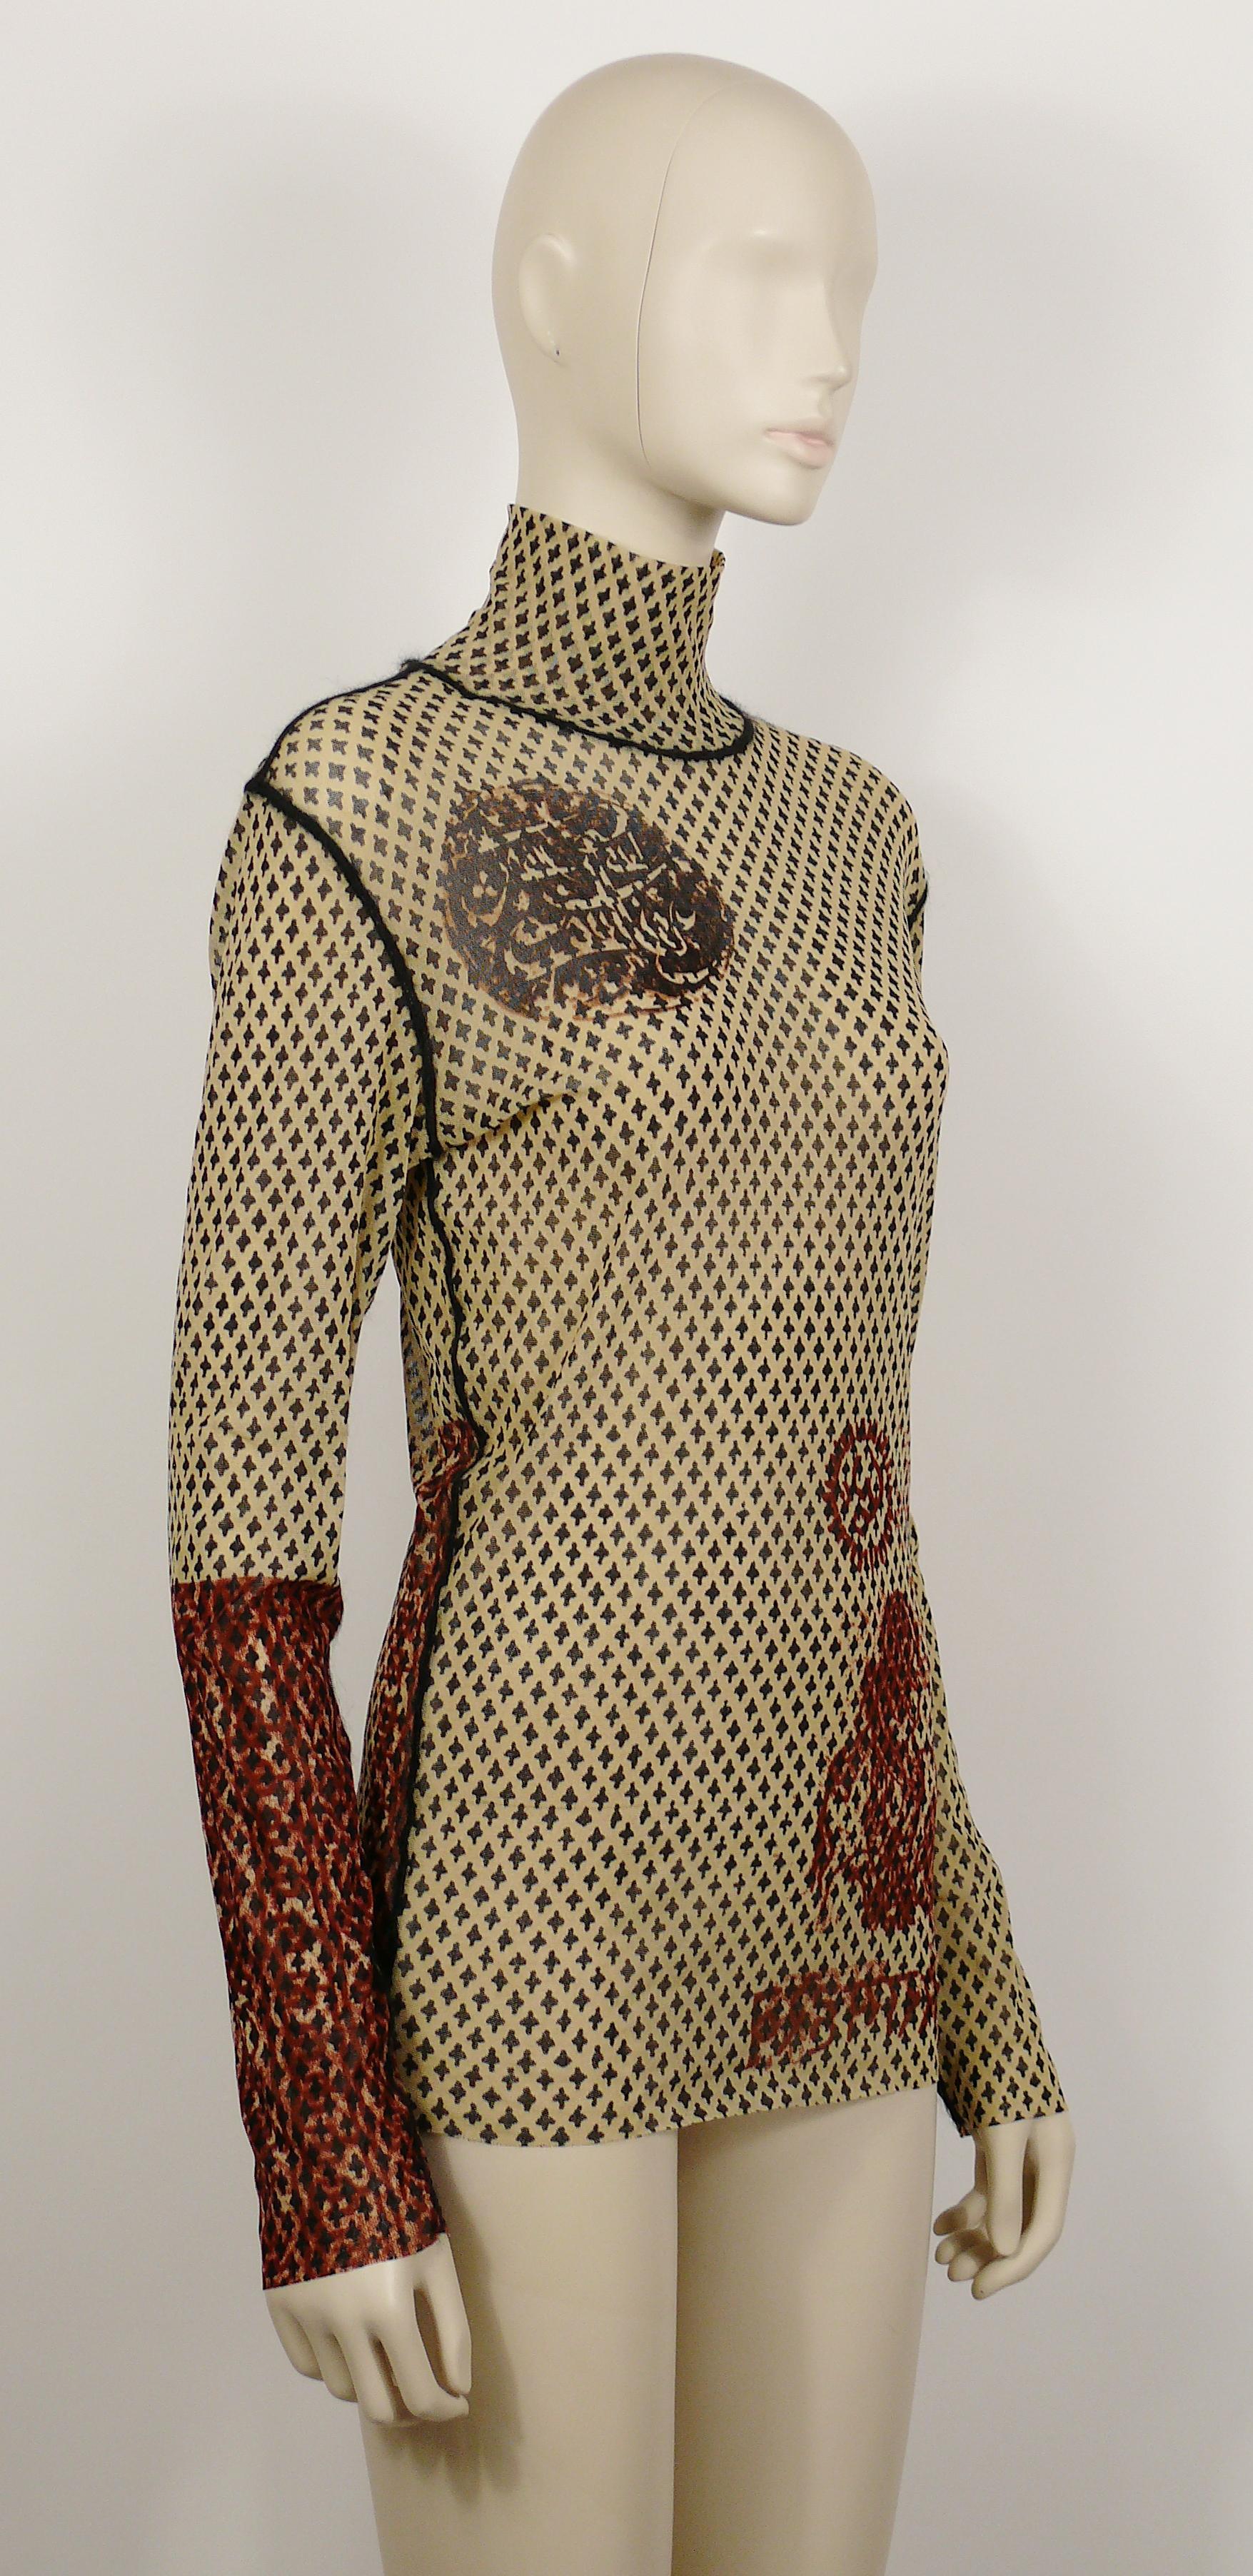 JEAN PAUL GAULTIER vintage oriental sheer mesh tattoo turtleneck top with visible black angora-like seams.

Label reads JEAN PAUL GAULTIER Maille.
Made in Italy.

Size label reads : L.
Please refer to measurements.

Mission composition